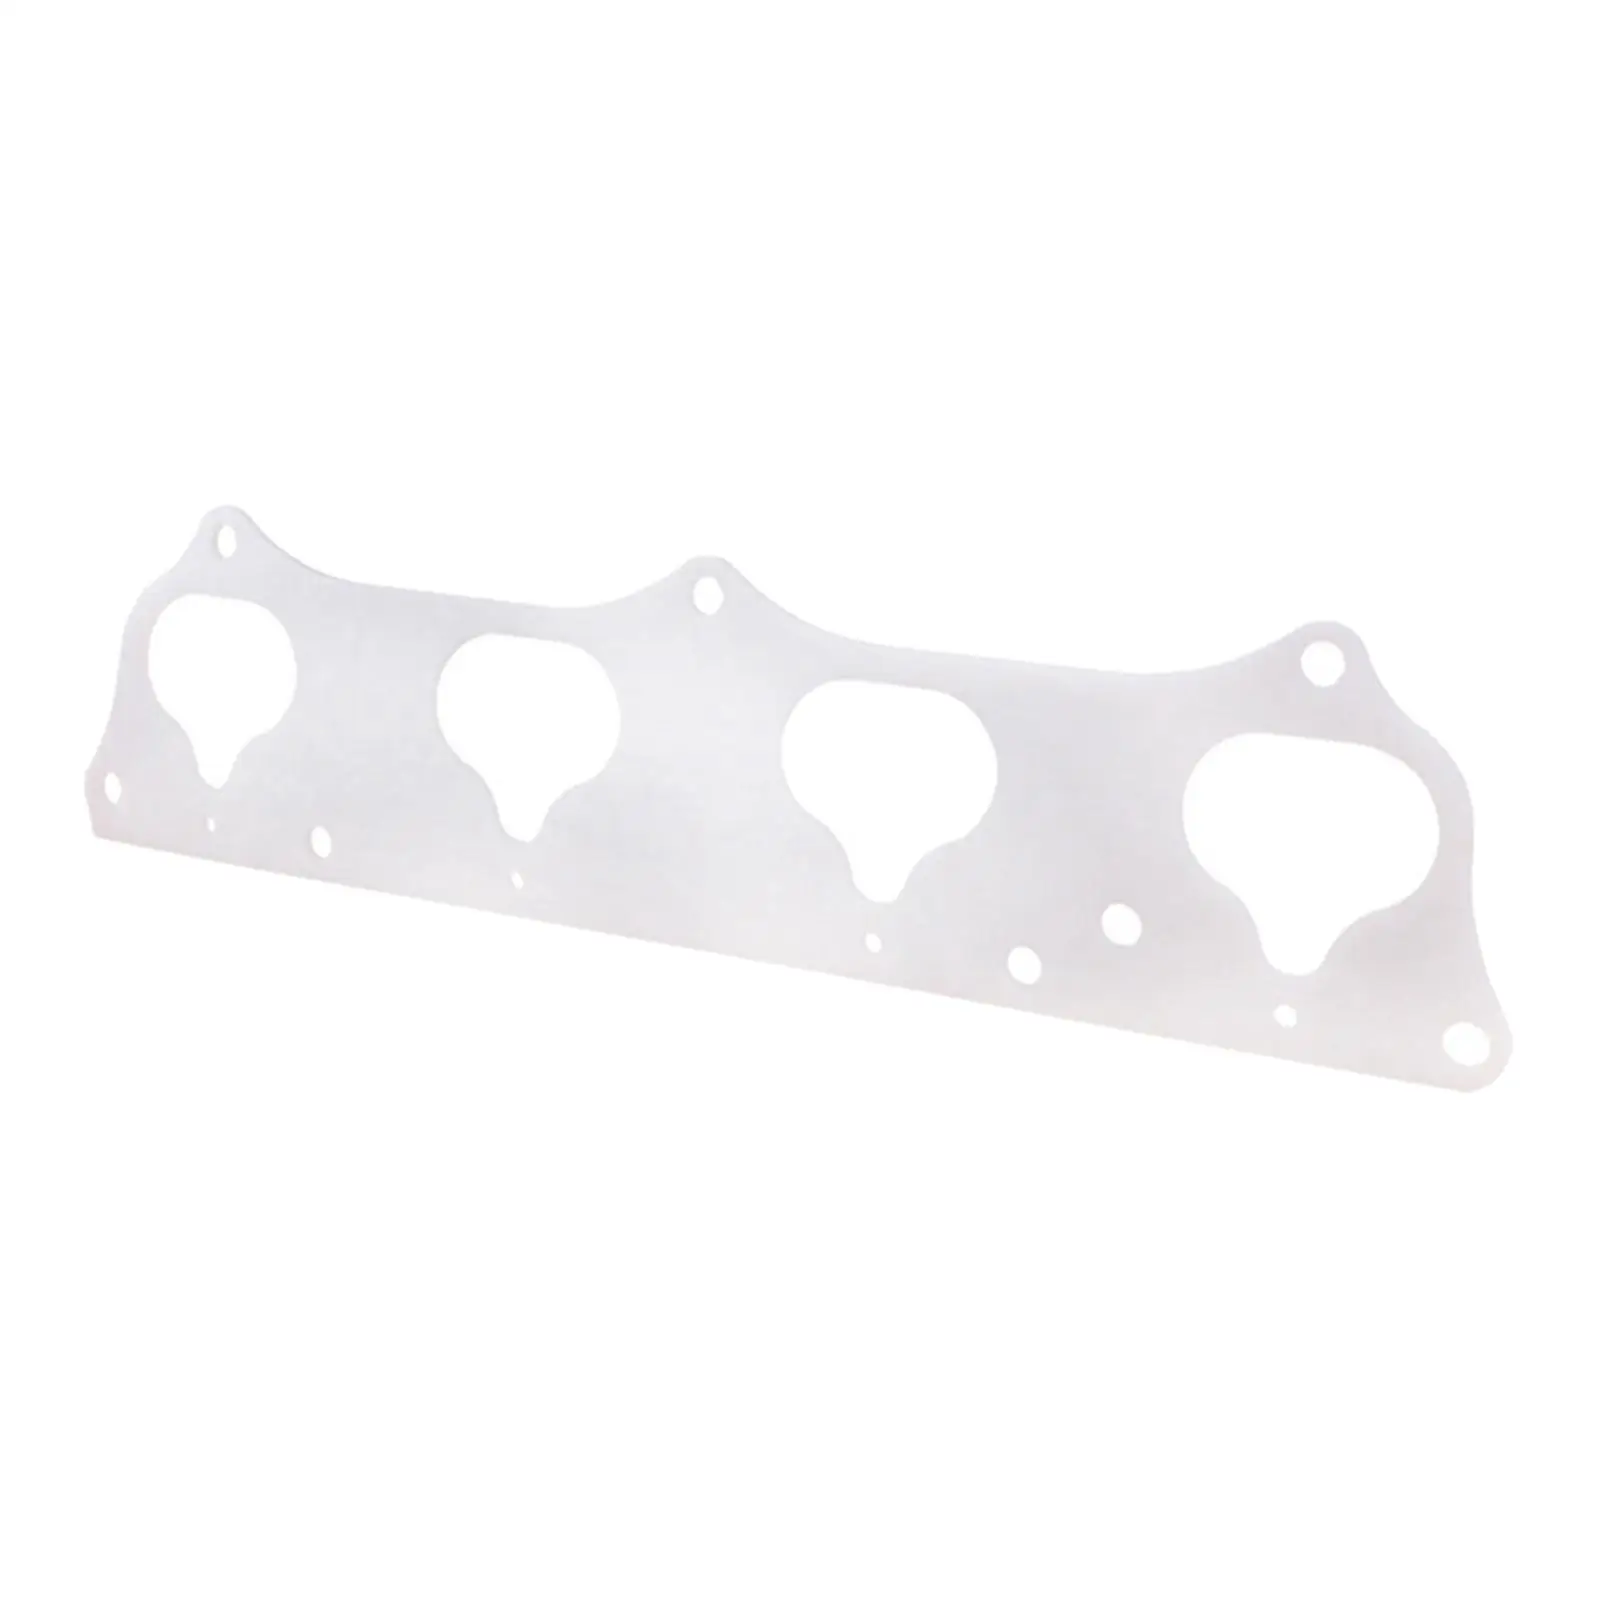 Thermal Intake Gasket Replaces for Swap K20A/A2/A3/Z1 K-series